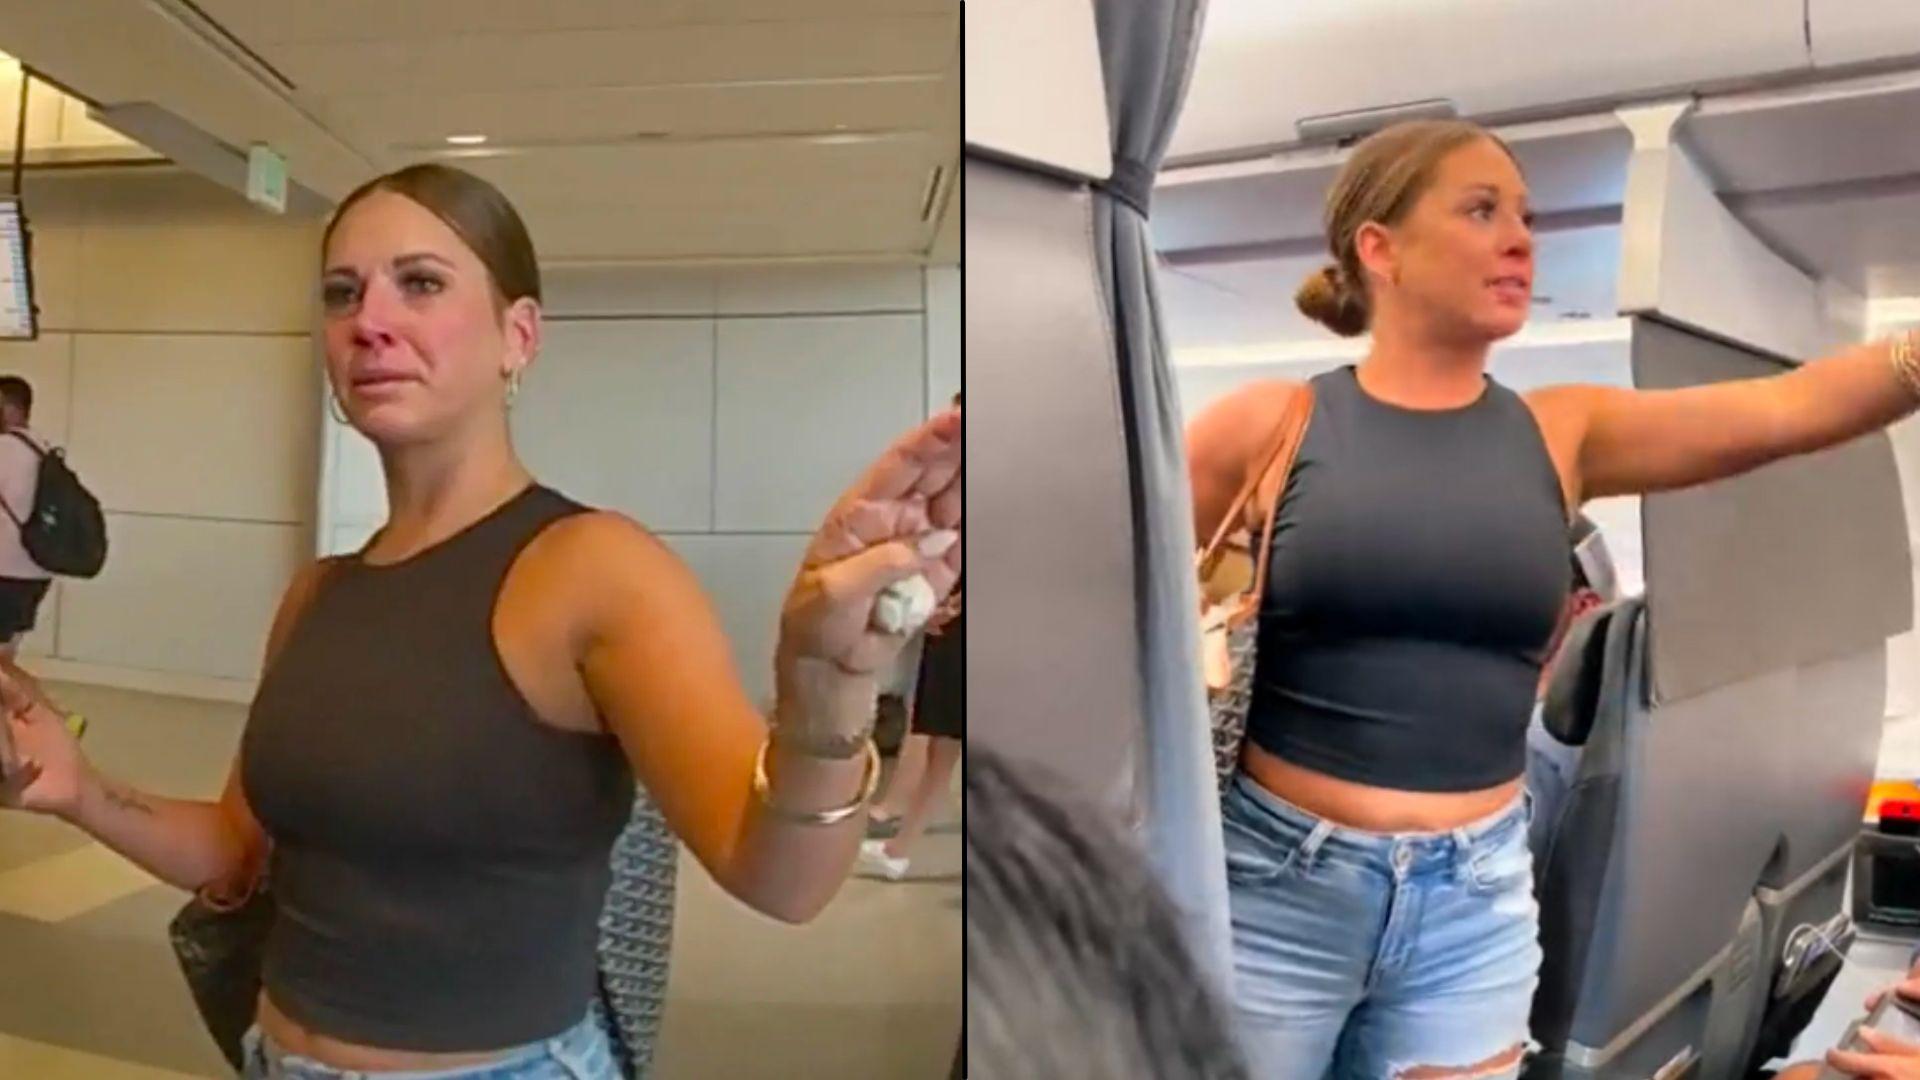 Woman kicked off plane for viral 'not real!' video has new surprise -  TheStreet